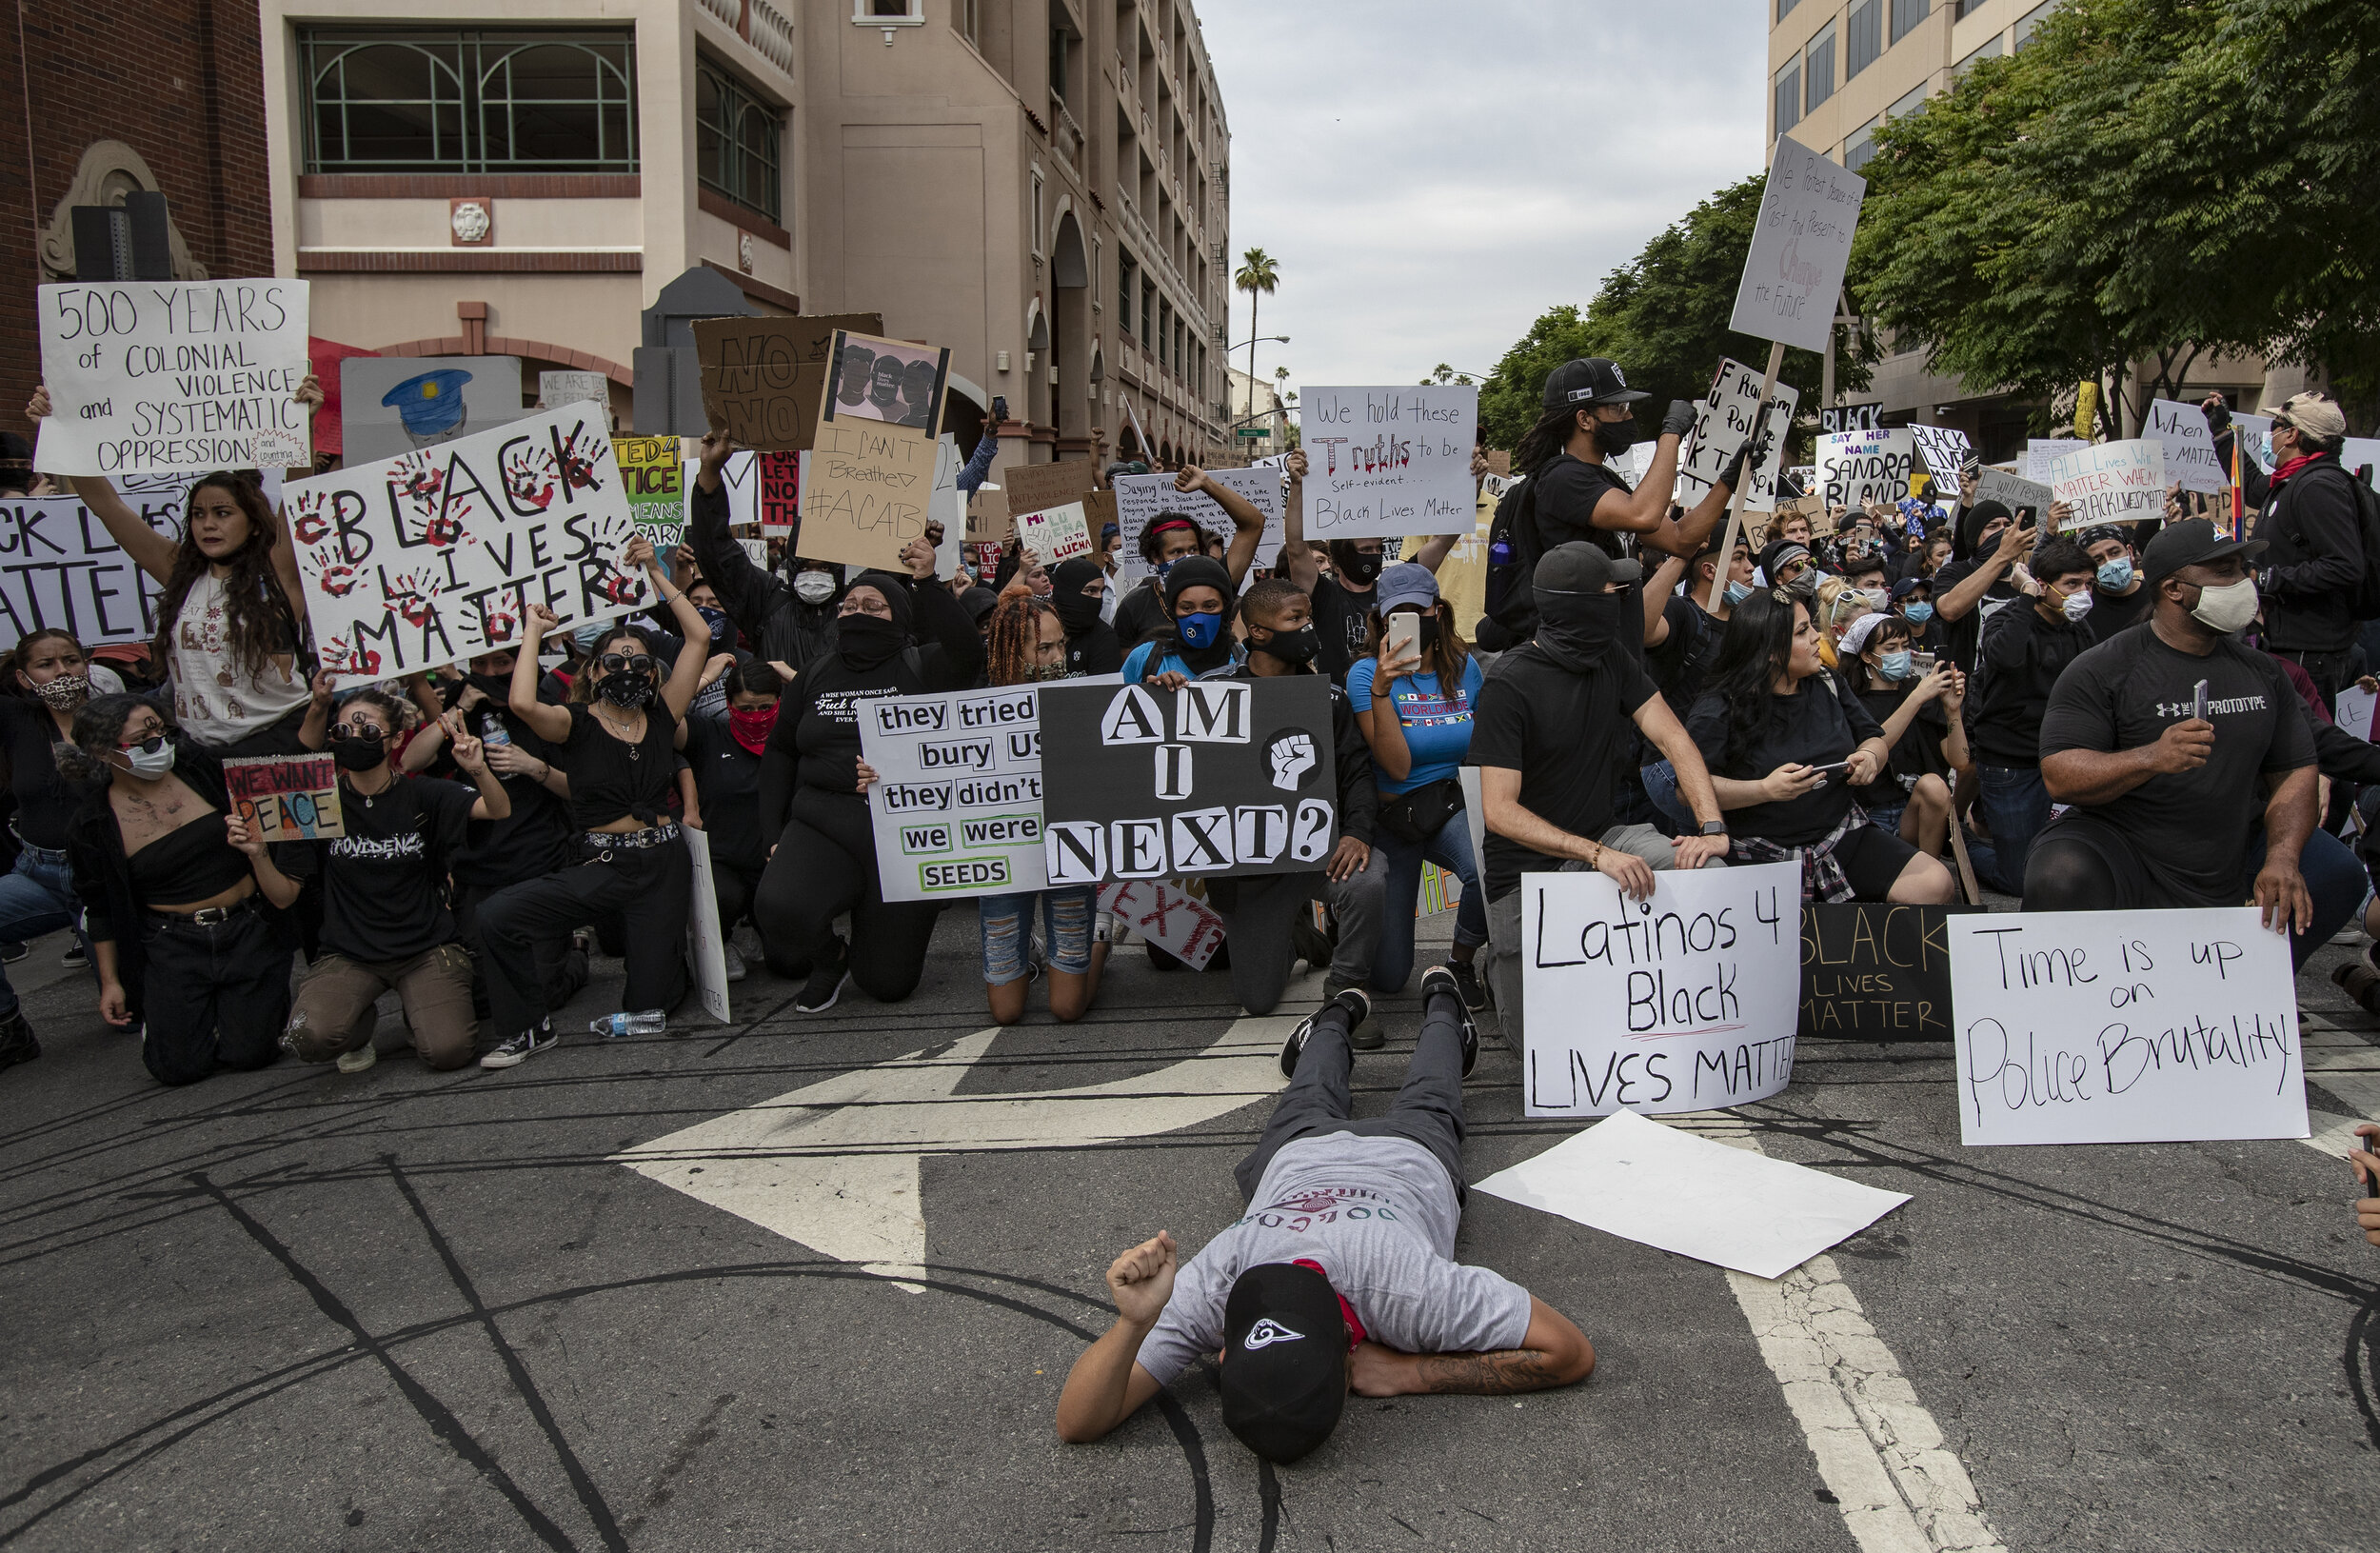  RIVERSIDE, CA - JUNE 1, 2020: Thousands of protesters marched to the Robert Presley Detention Center and were met with a road block of law enforcement during a protest against the death of George Floyd during the coronavirus pandemic on June 1, 2020